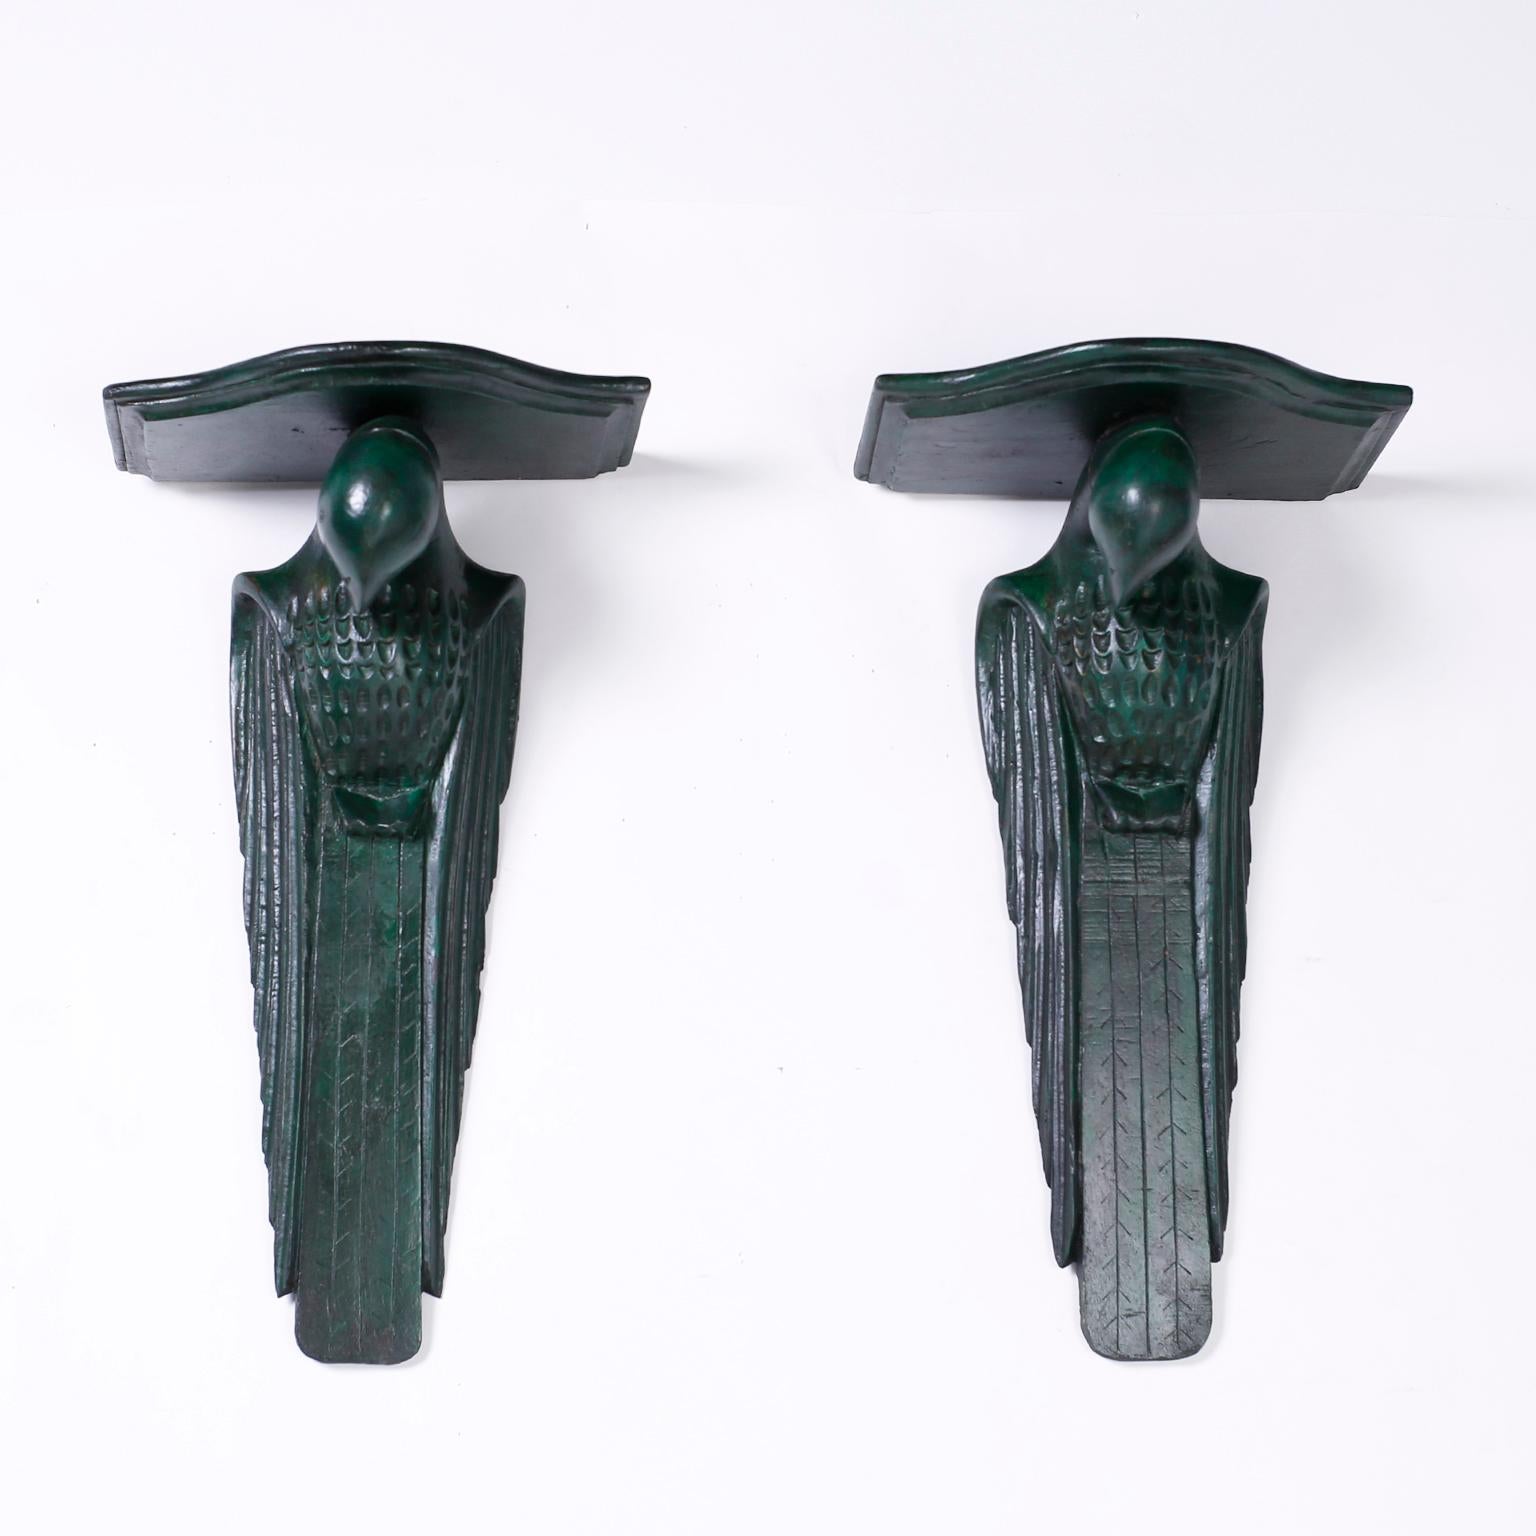 Pair of Anglo-Indian carved wood parrot or bird wall brackets in the Art Deco style with a unique faux verdigris bronze finish.